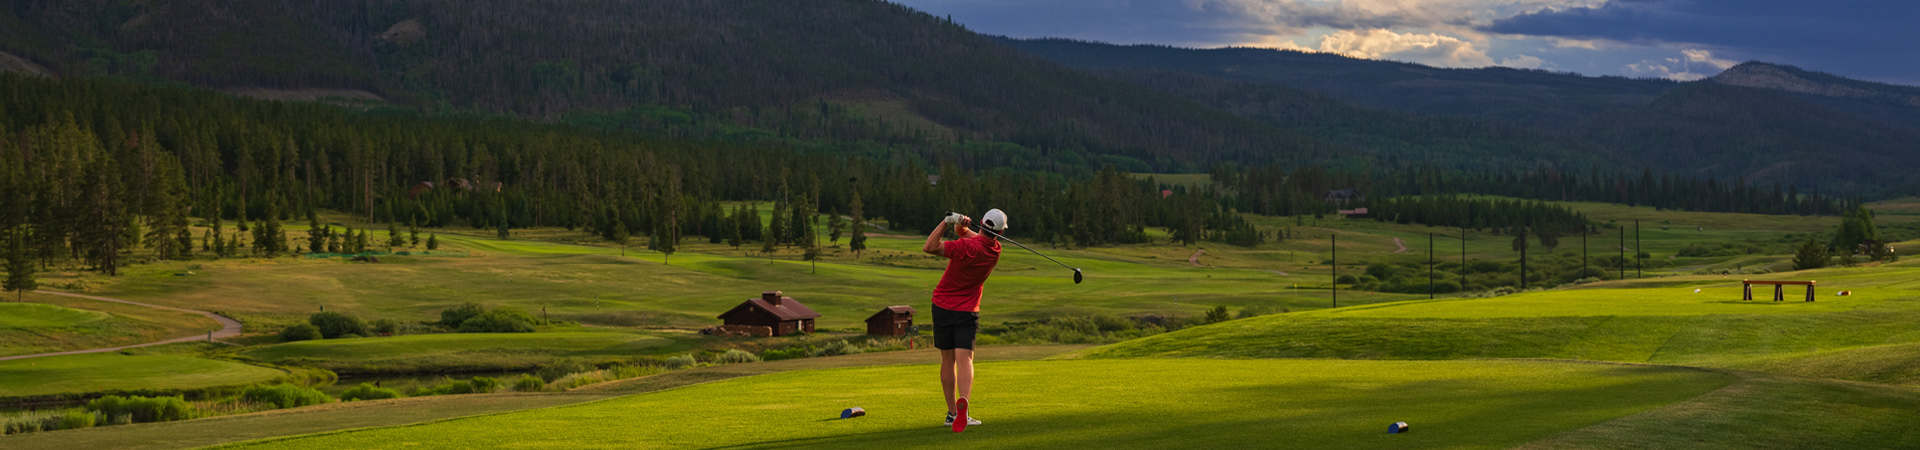 A golfer in a red shirt and white cap is captured in mid-swing on a lush golf course.